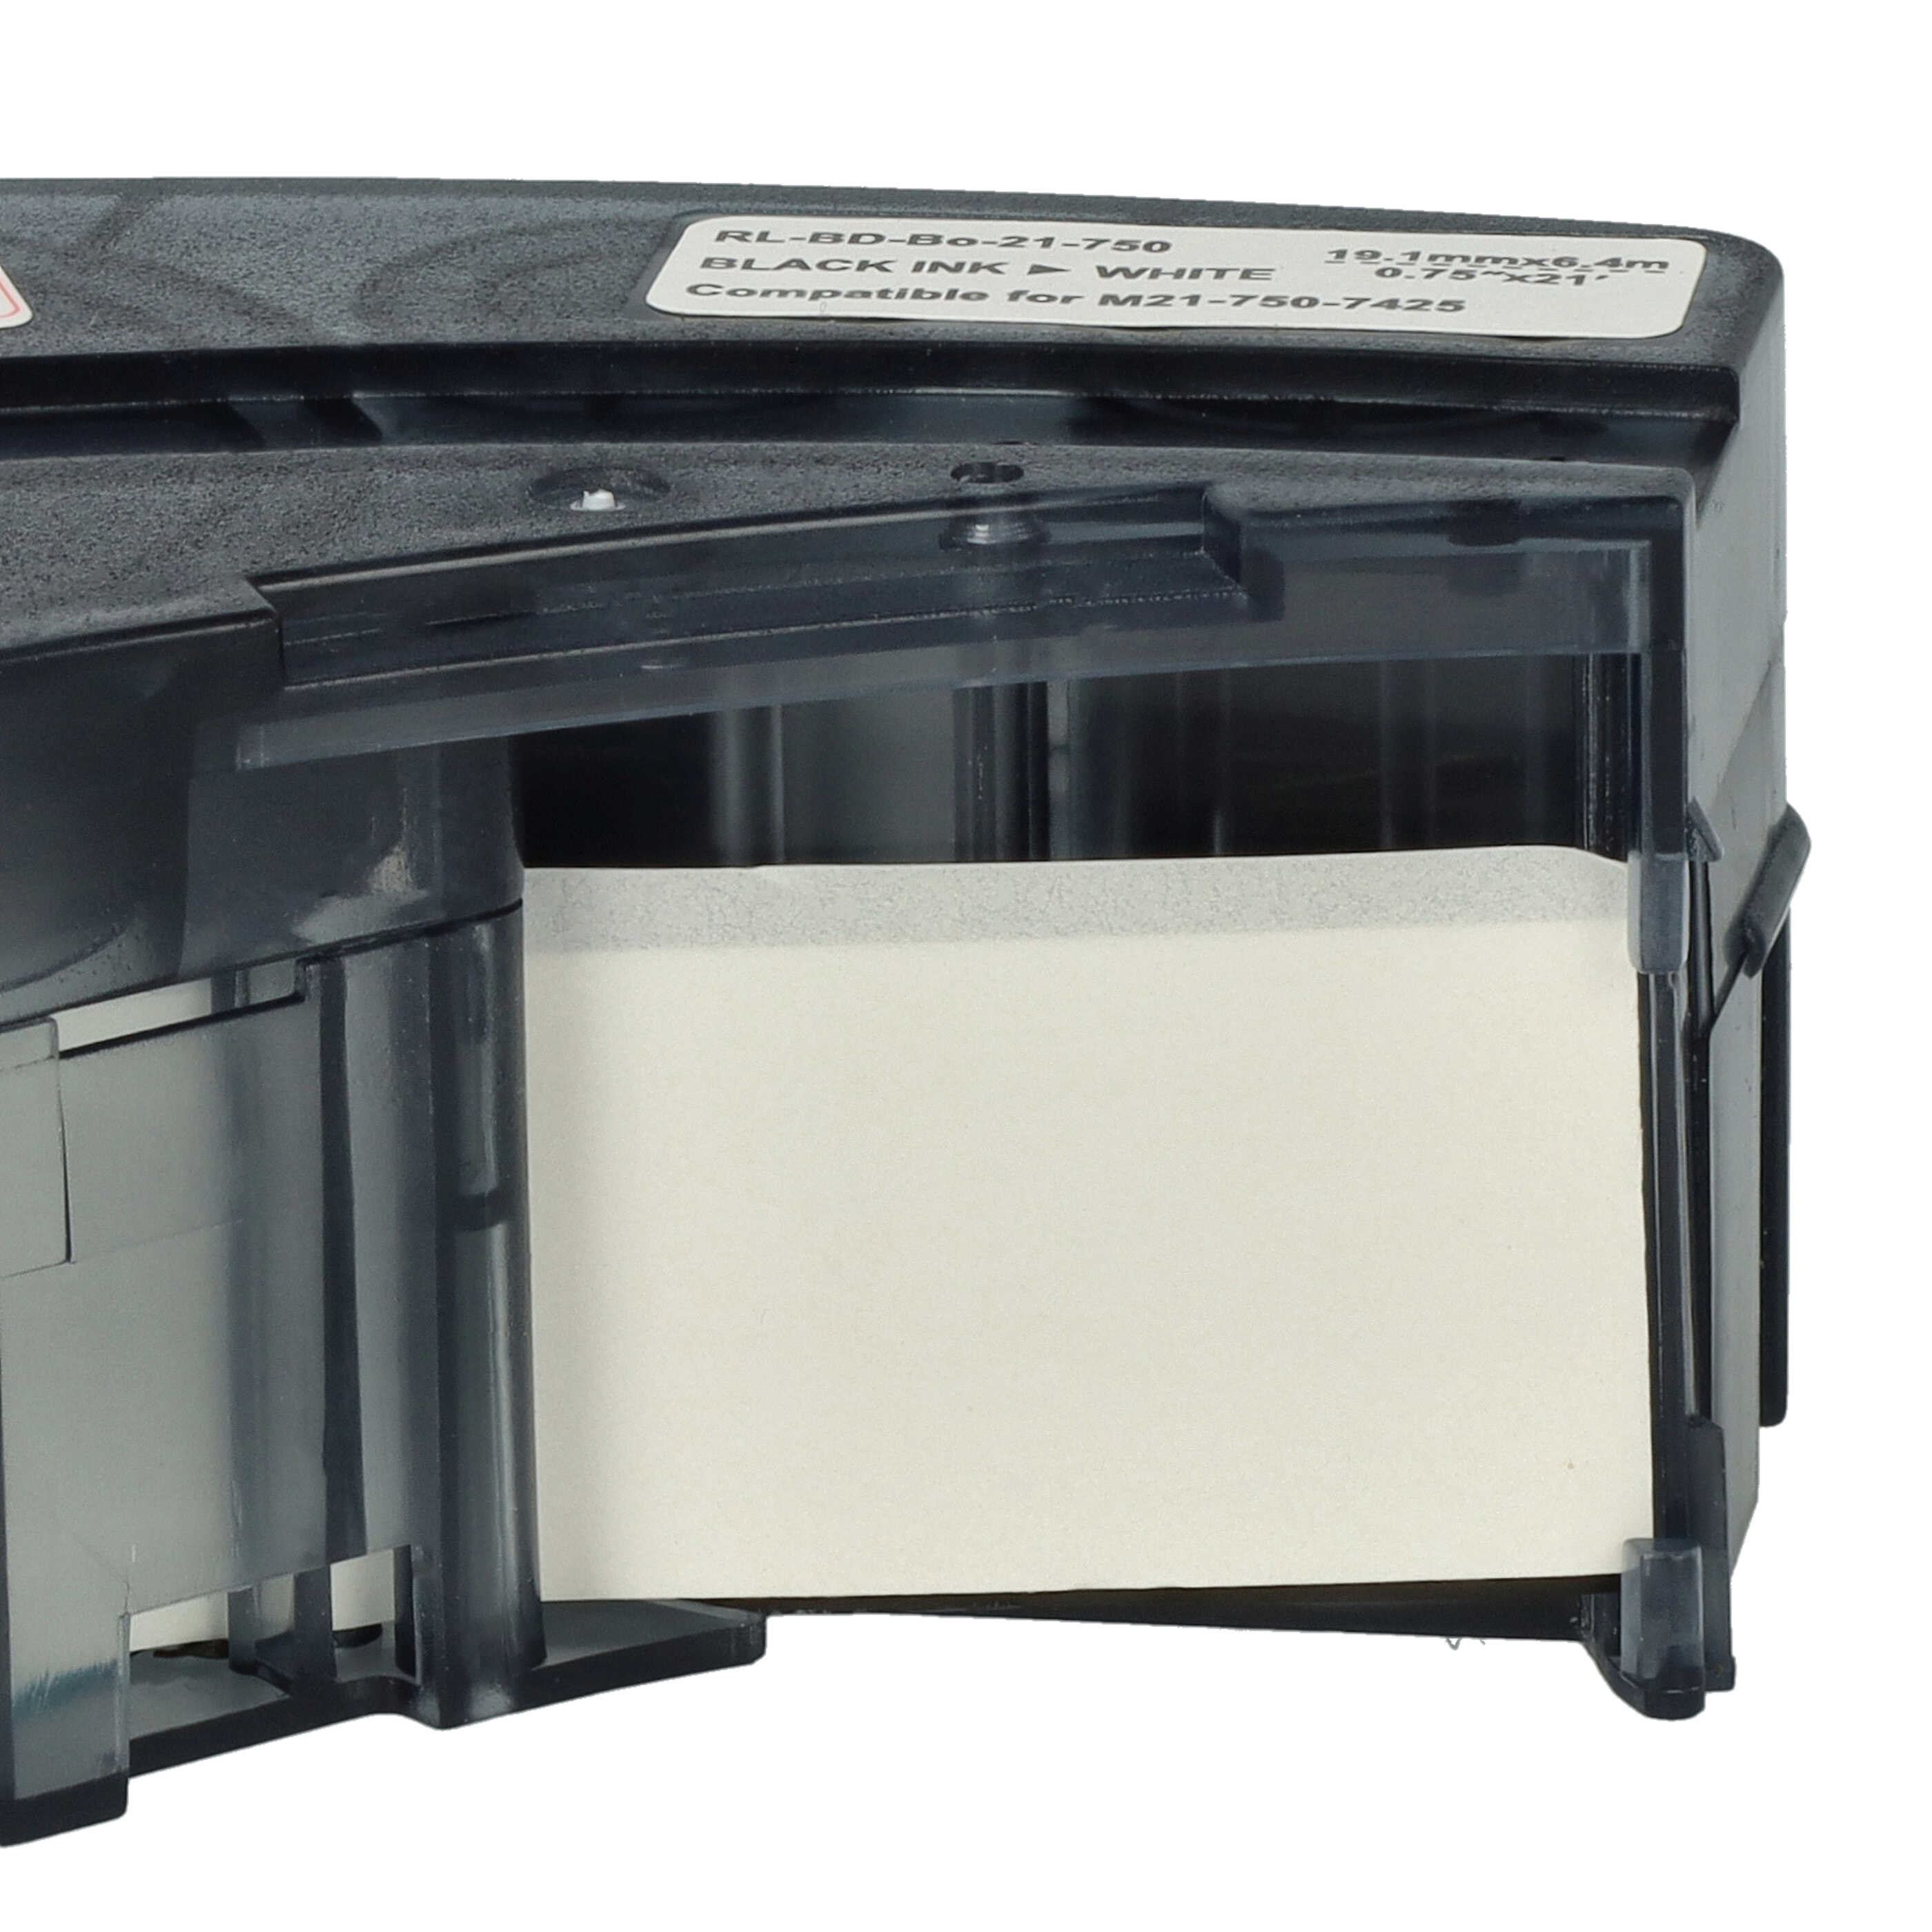 Label Tape as Replacement for Brady M21-750-7425 - 19.05 mm Black to White, polypropylene